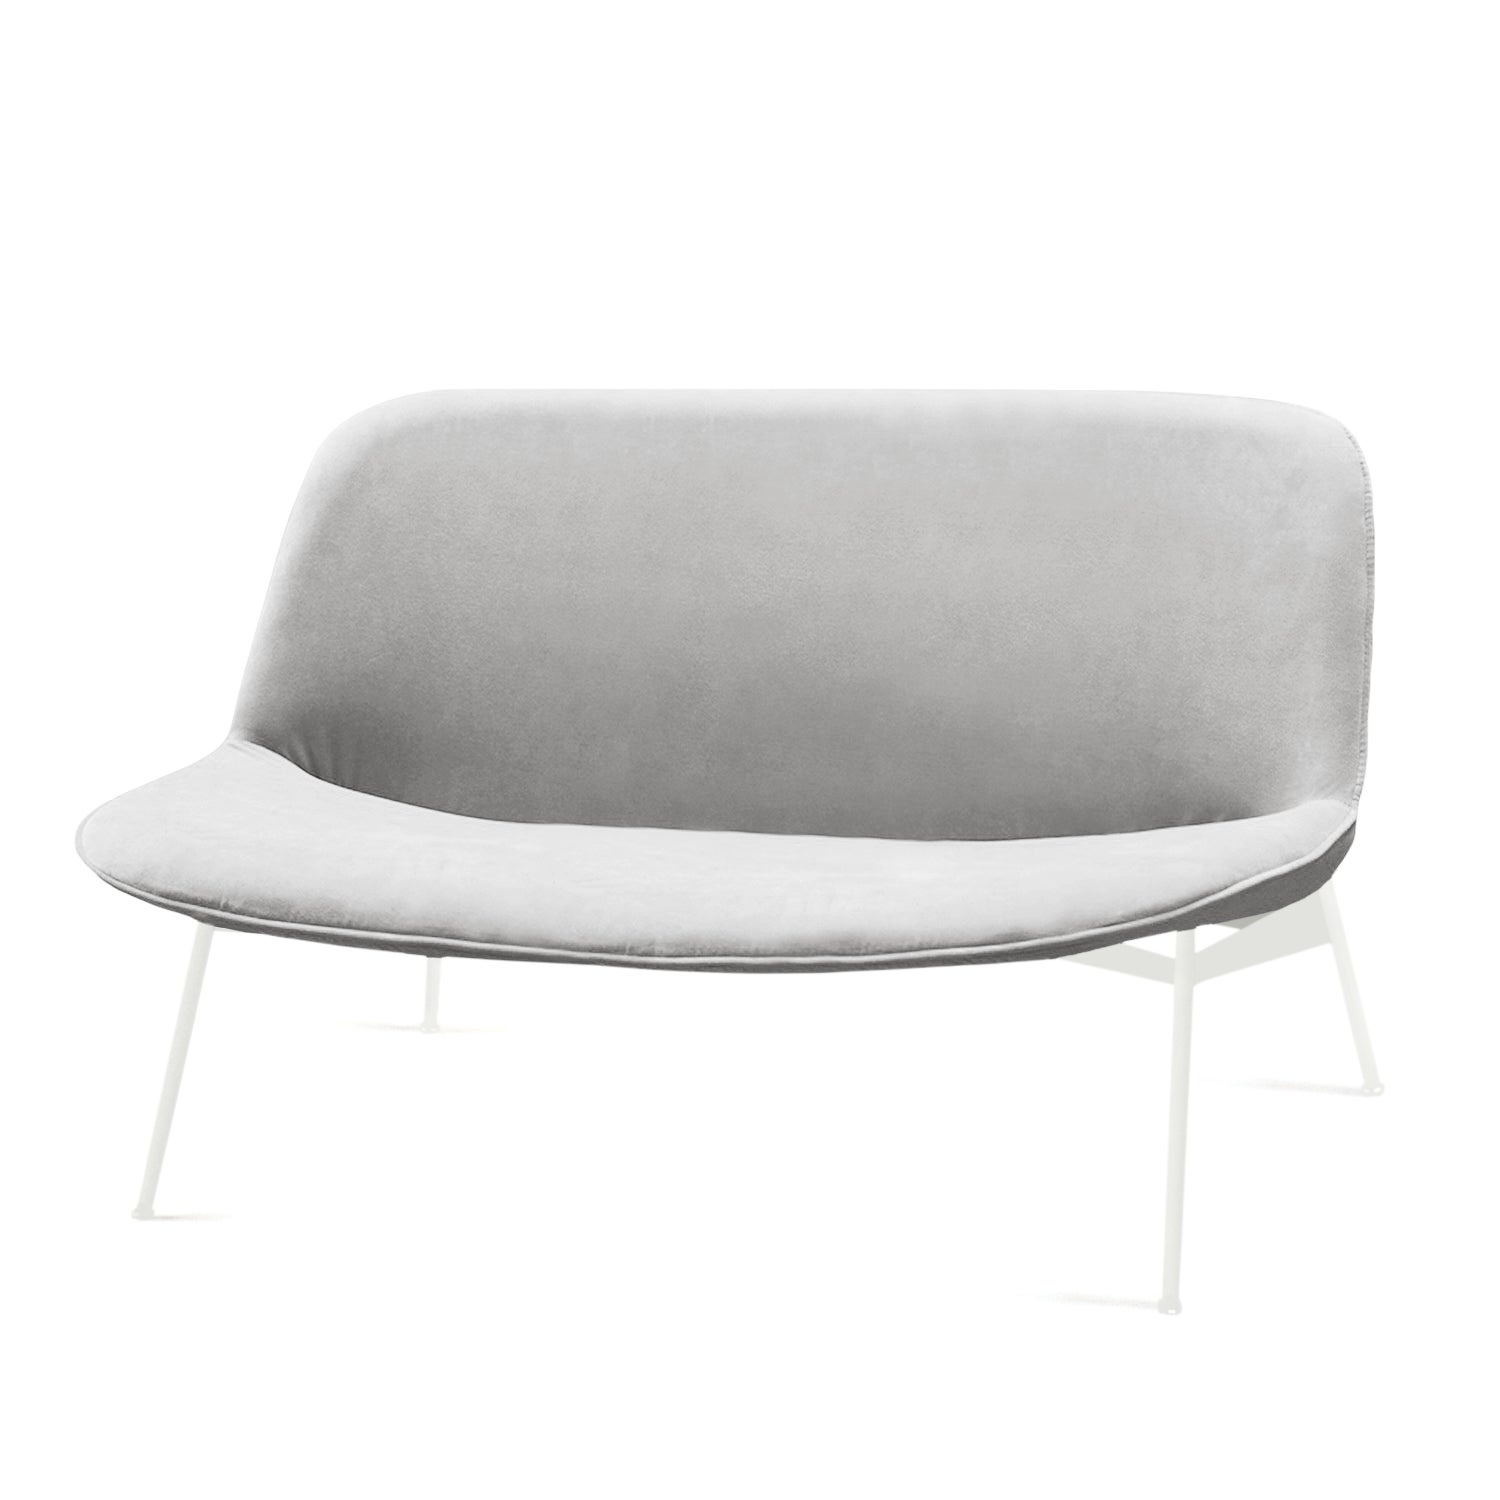 Chiado Sofa, Large with Aluminum and White For Sale